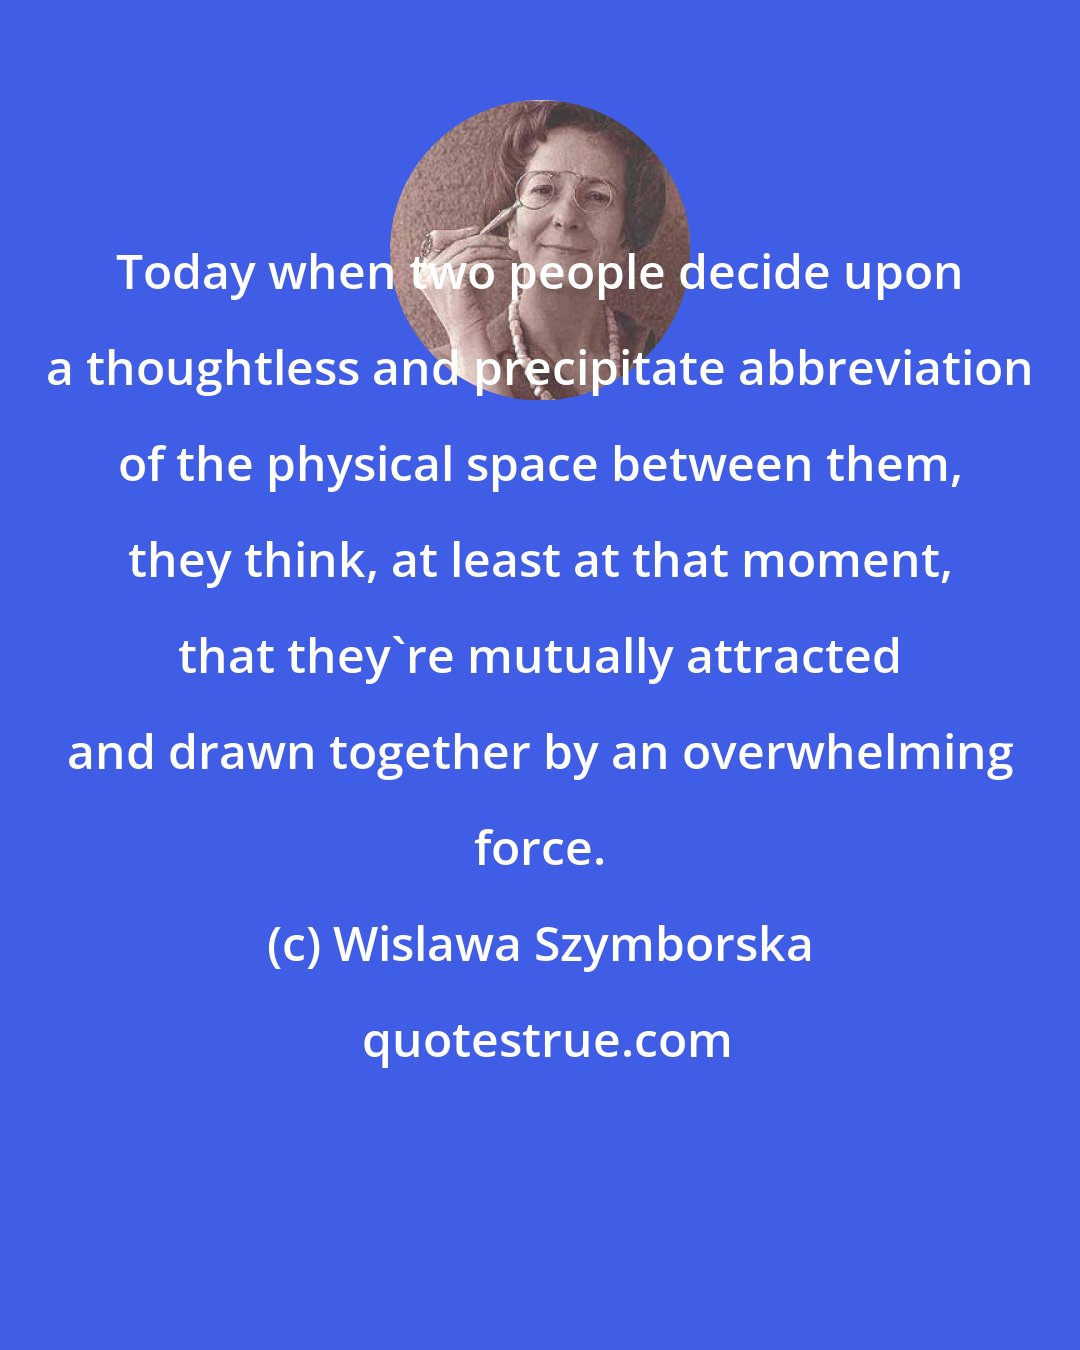 Wislawa Szymborska: Today when two people decide upon a thoughtless and precipitate abbreviation of the physical space between them, they think, at least at that moment, that they're mutually attracted and drawn together by an overwhelming force.